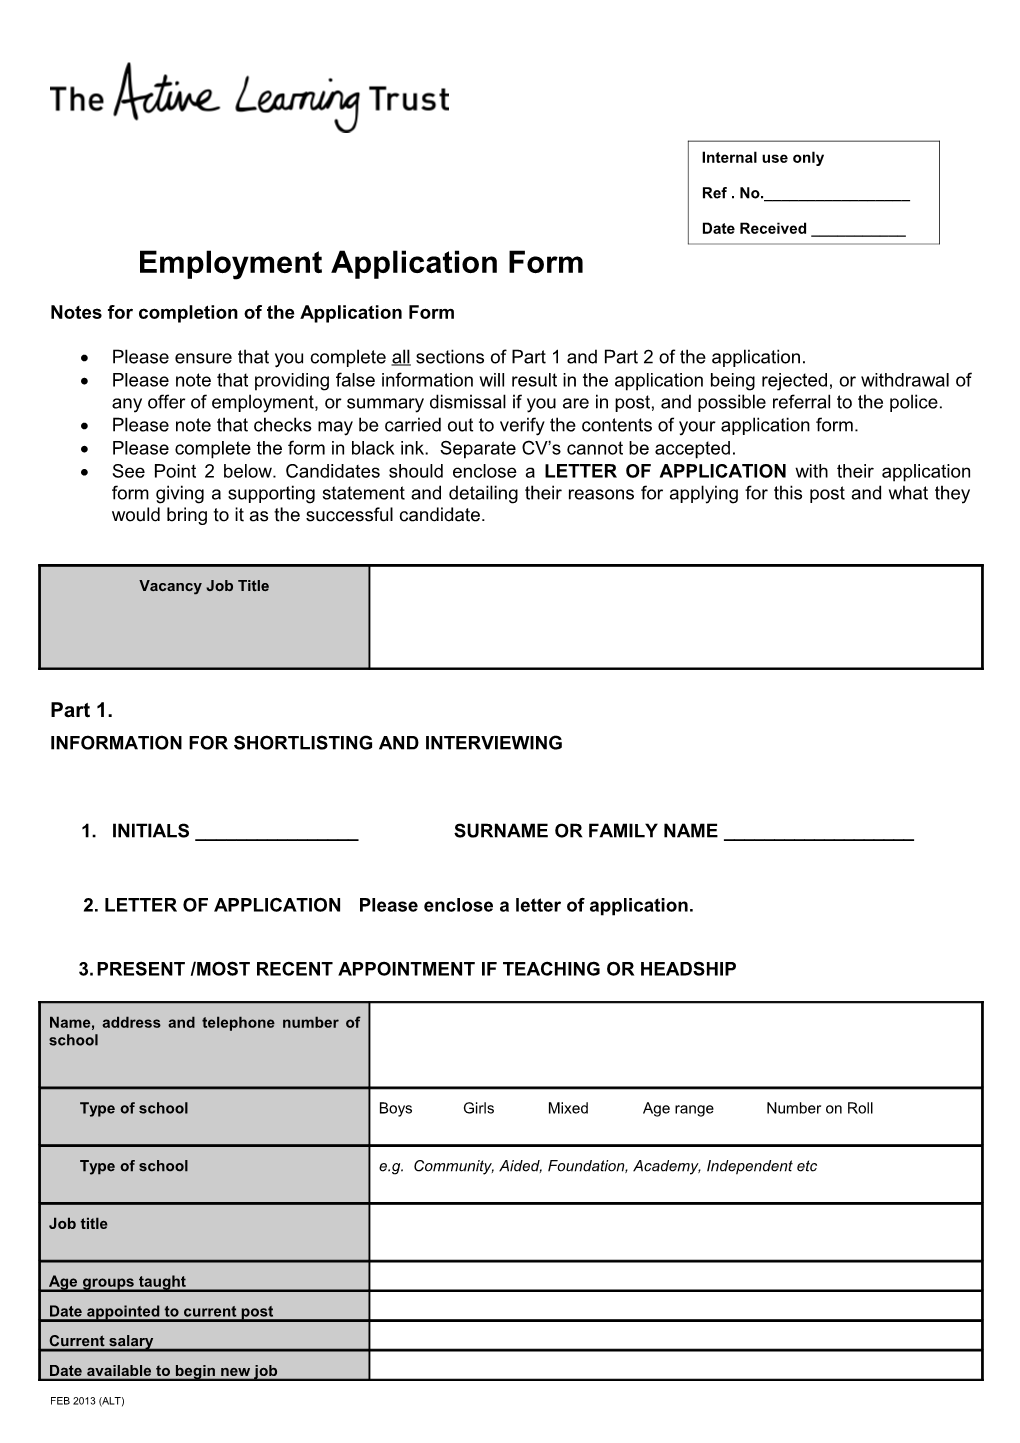 Notes for Completion of the Application Form